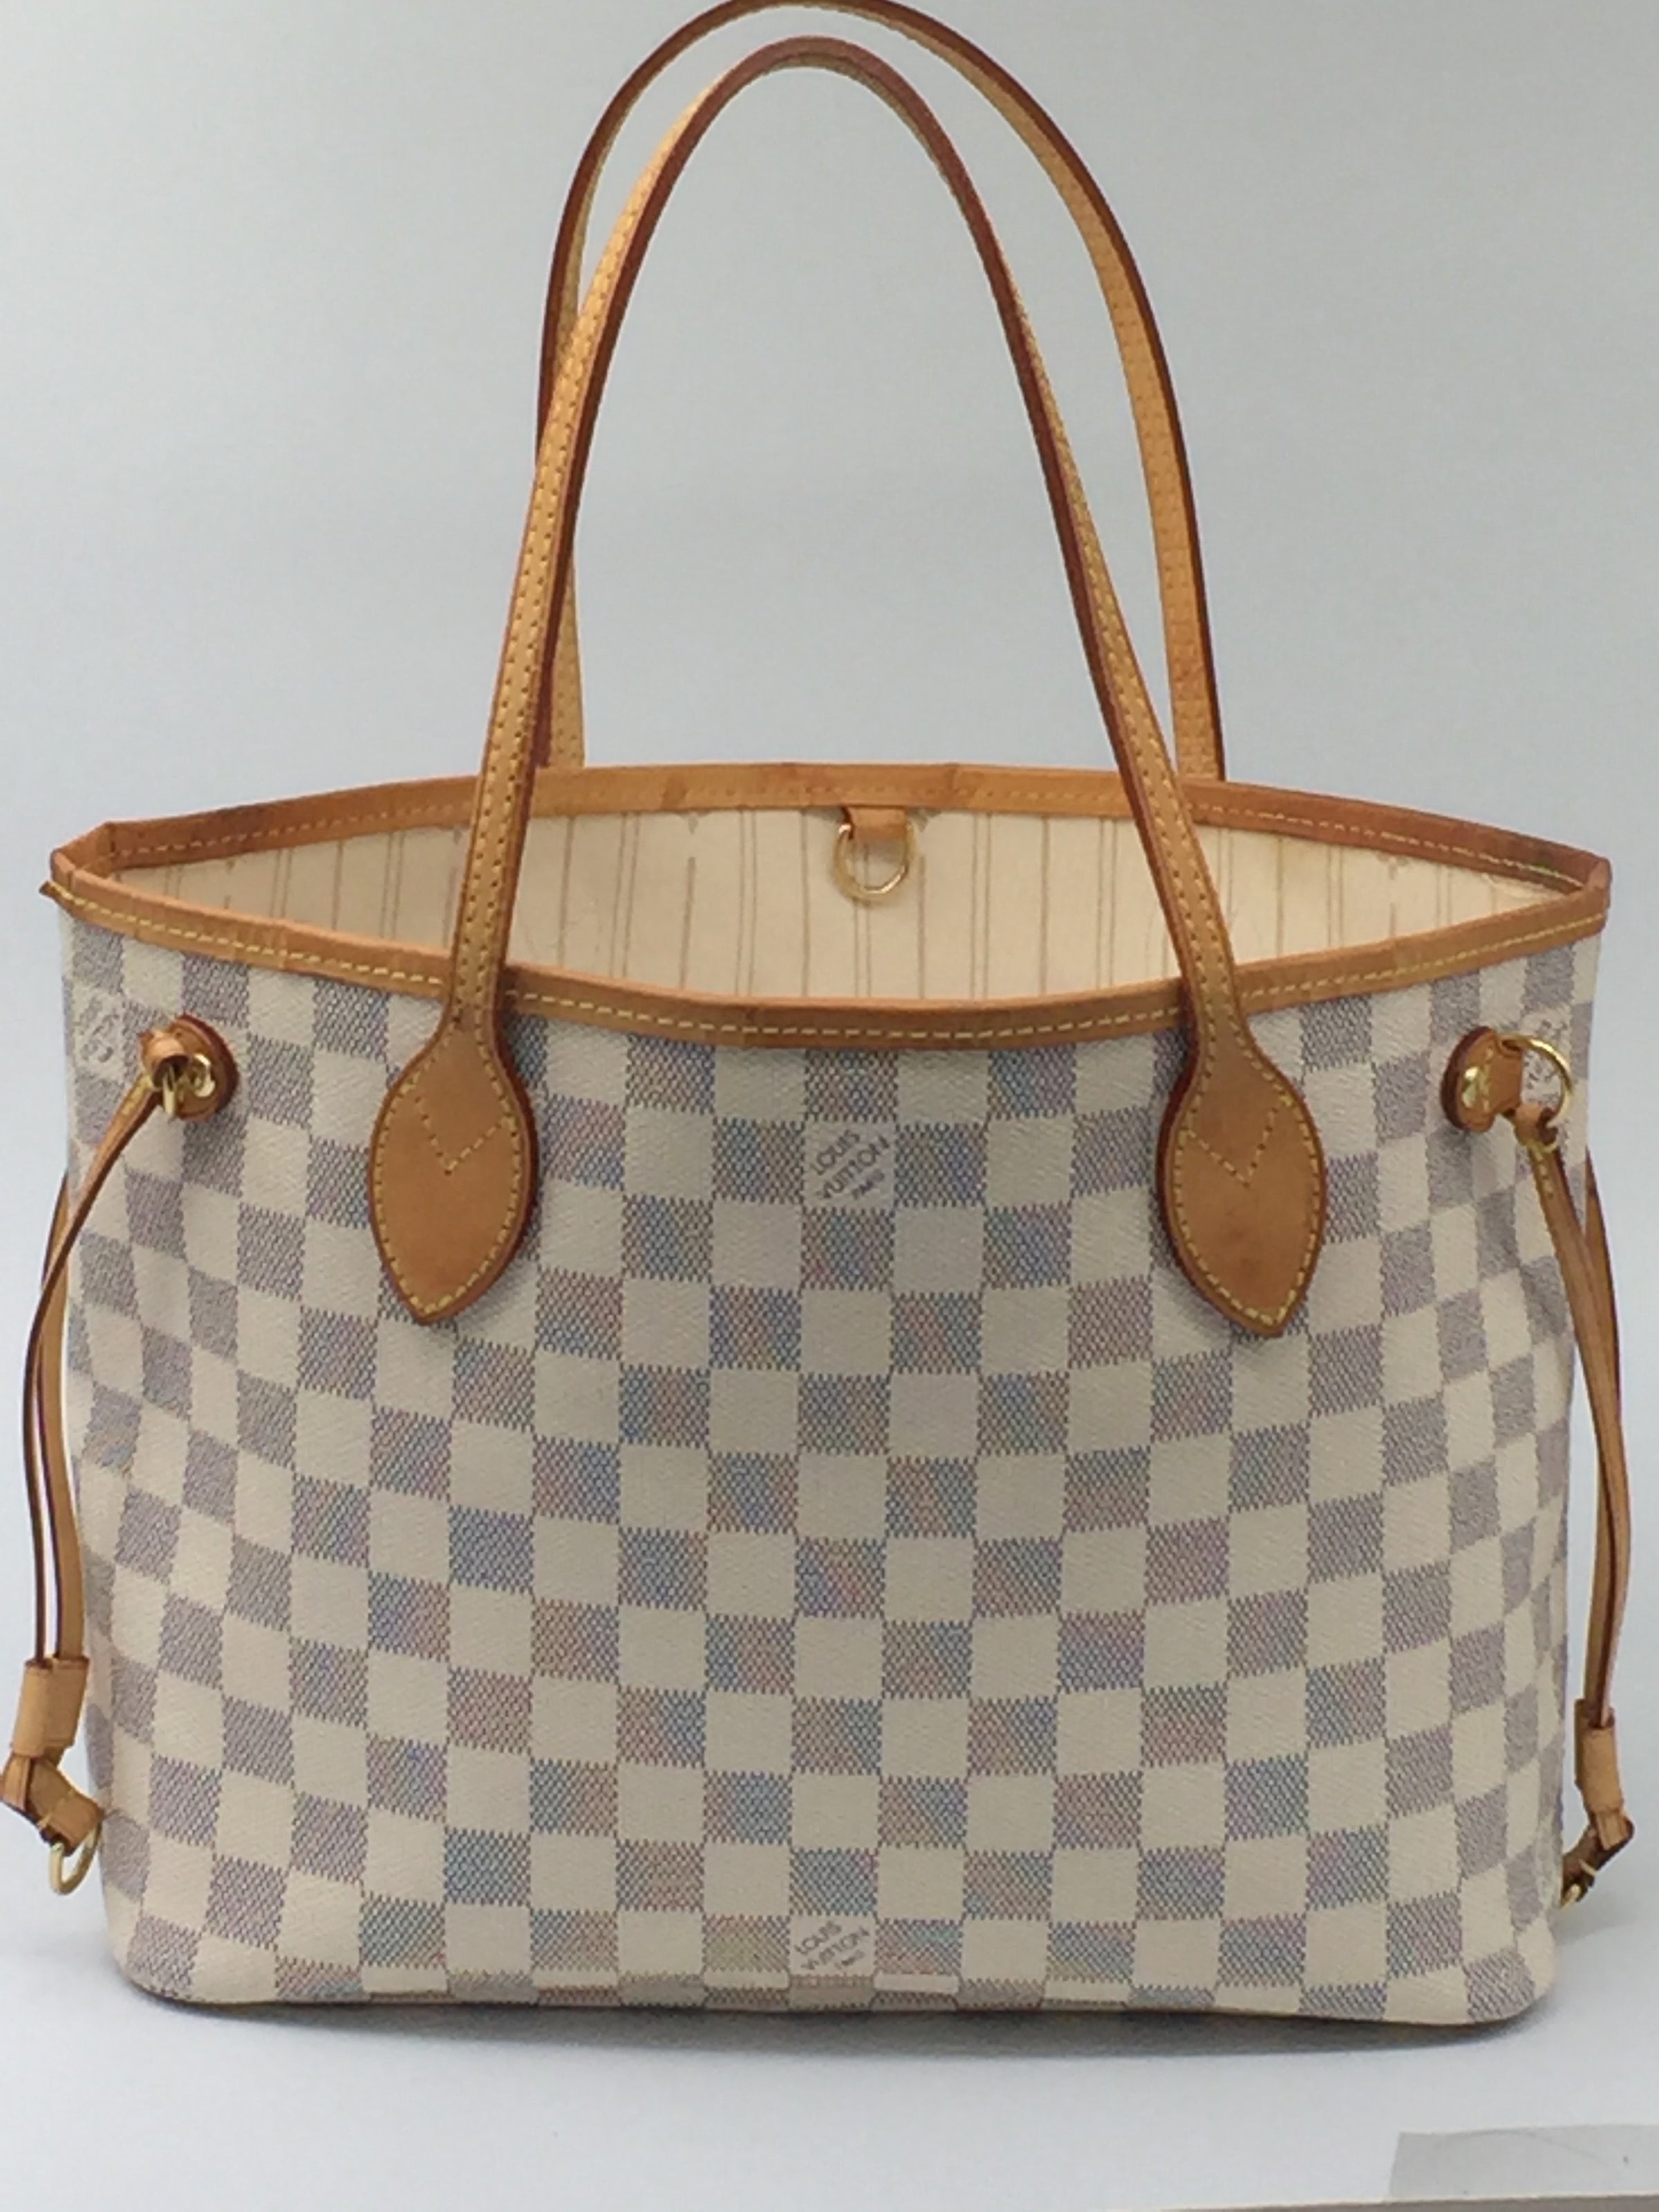 PRELOVED Louis Vuitton Damier Azur Neverfull PM Tote SD4181 051523